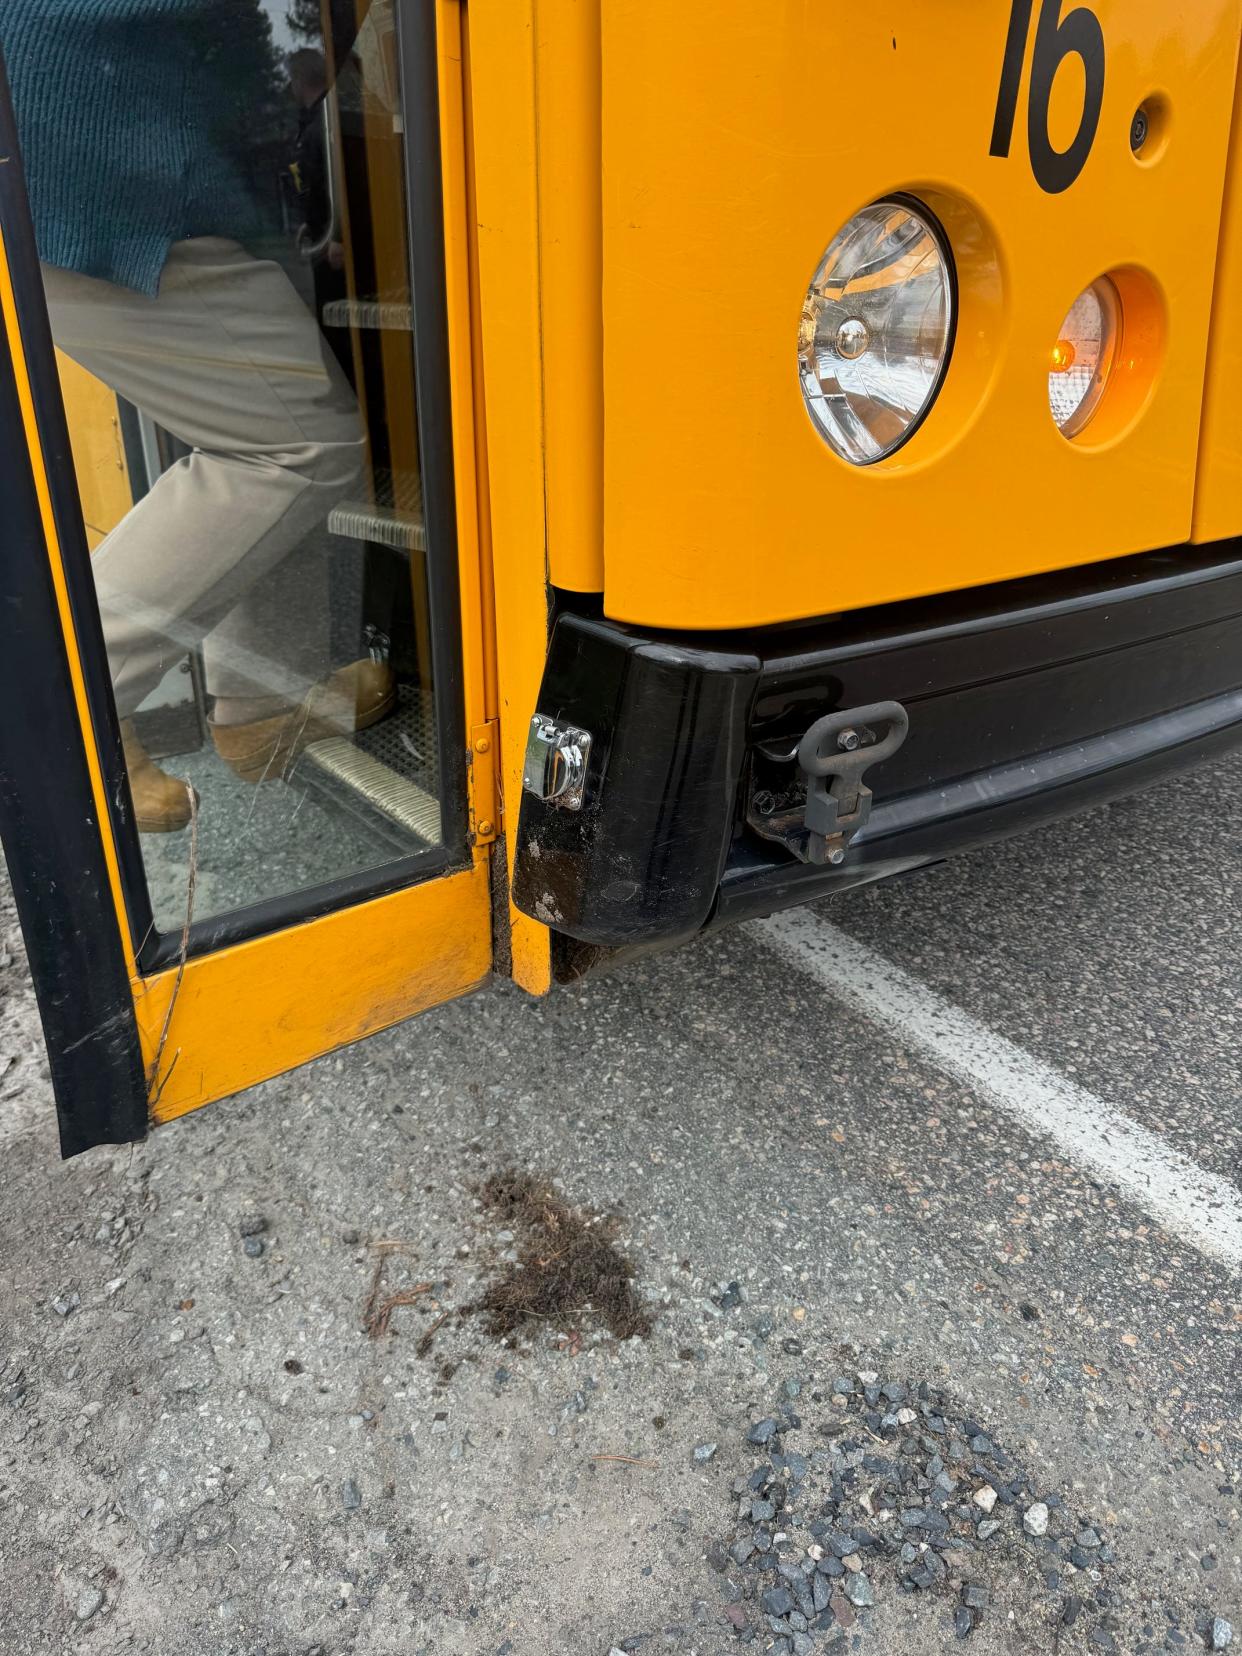 Millis police are accusing a bus driver of assaulting a woman who confronted him on Wednesday after he allegedly struck some trash barrels and bushes while attempting to make a three-point turn.